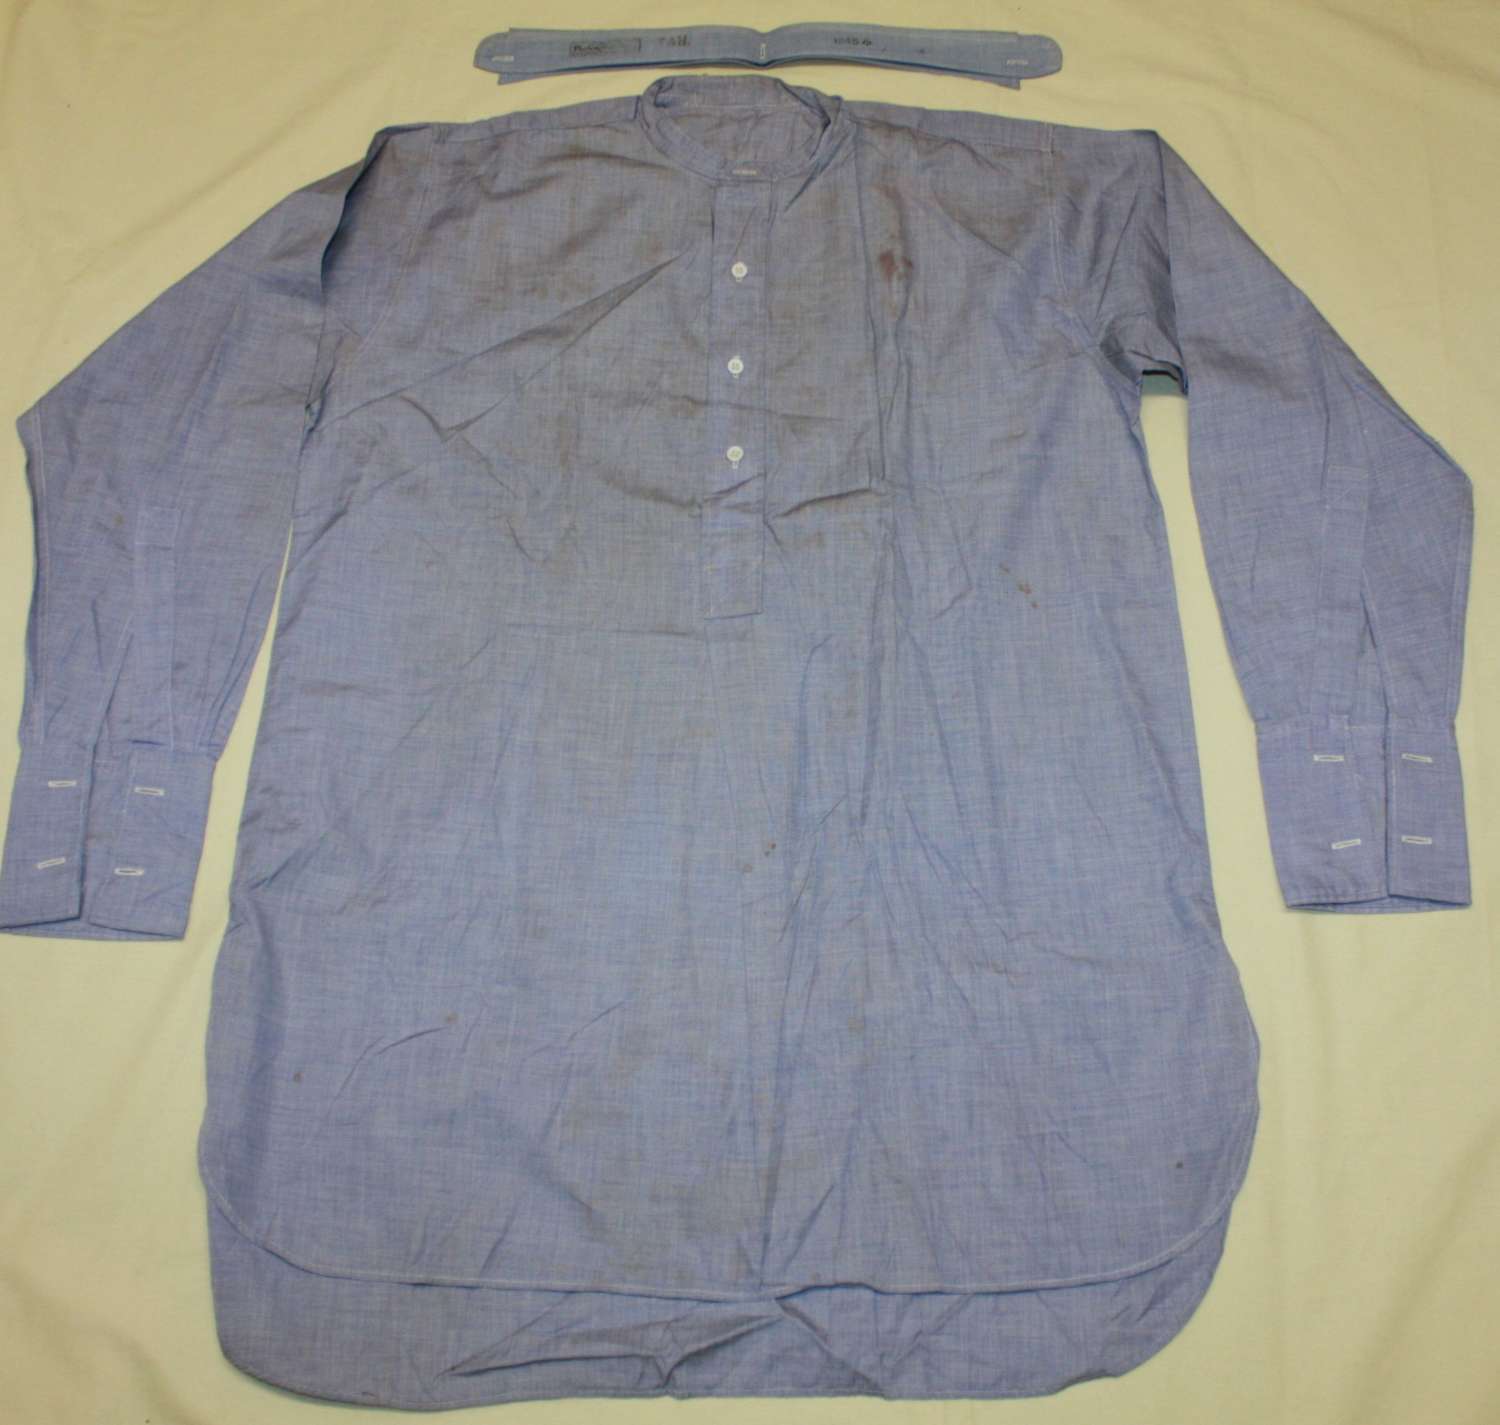 A 1945 DATED RAF OTHER RANKS COLLARLESS SHIRT